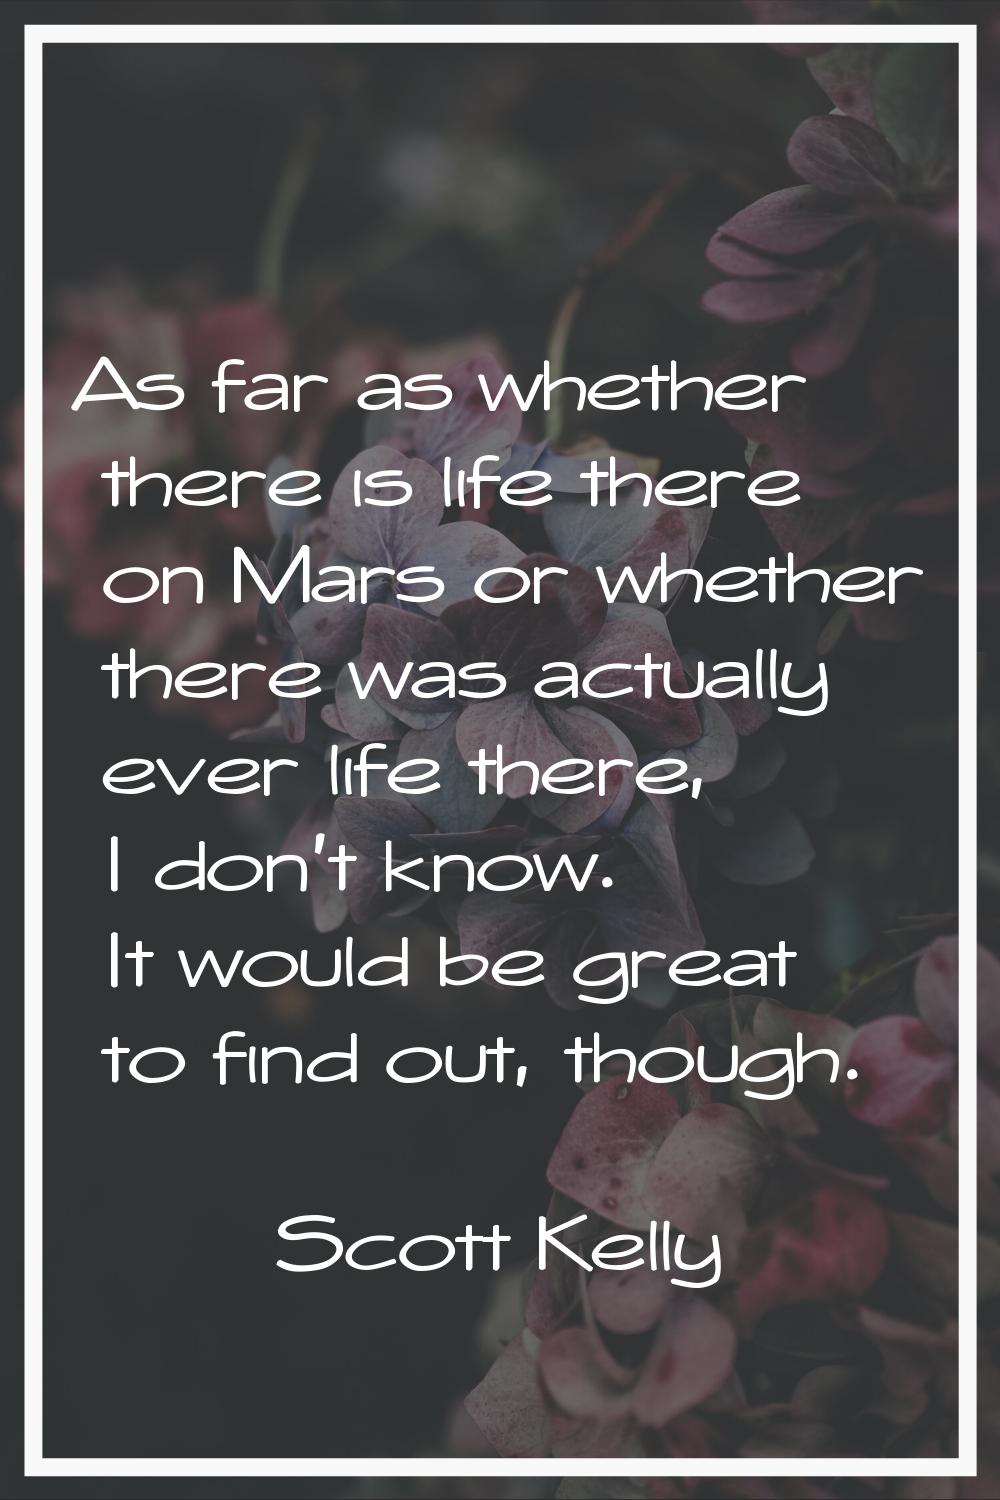 As far as whether there is life there on Mars or whether there was actually ever life there, I don'